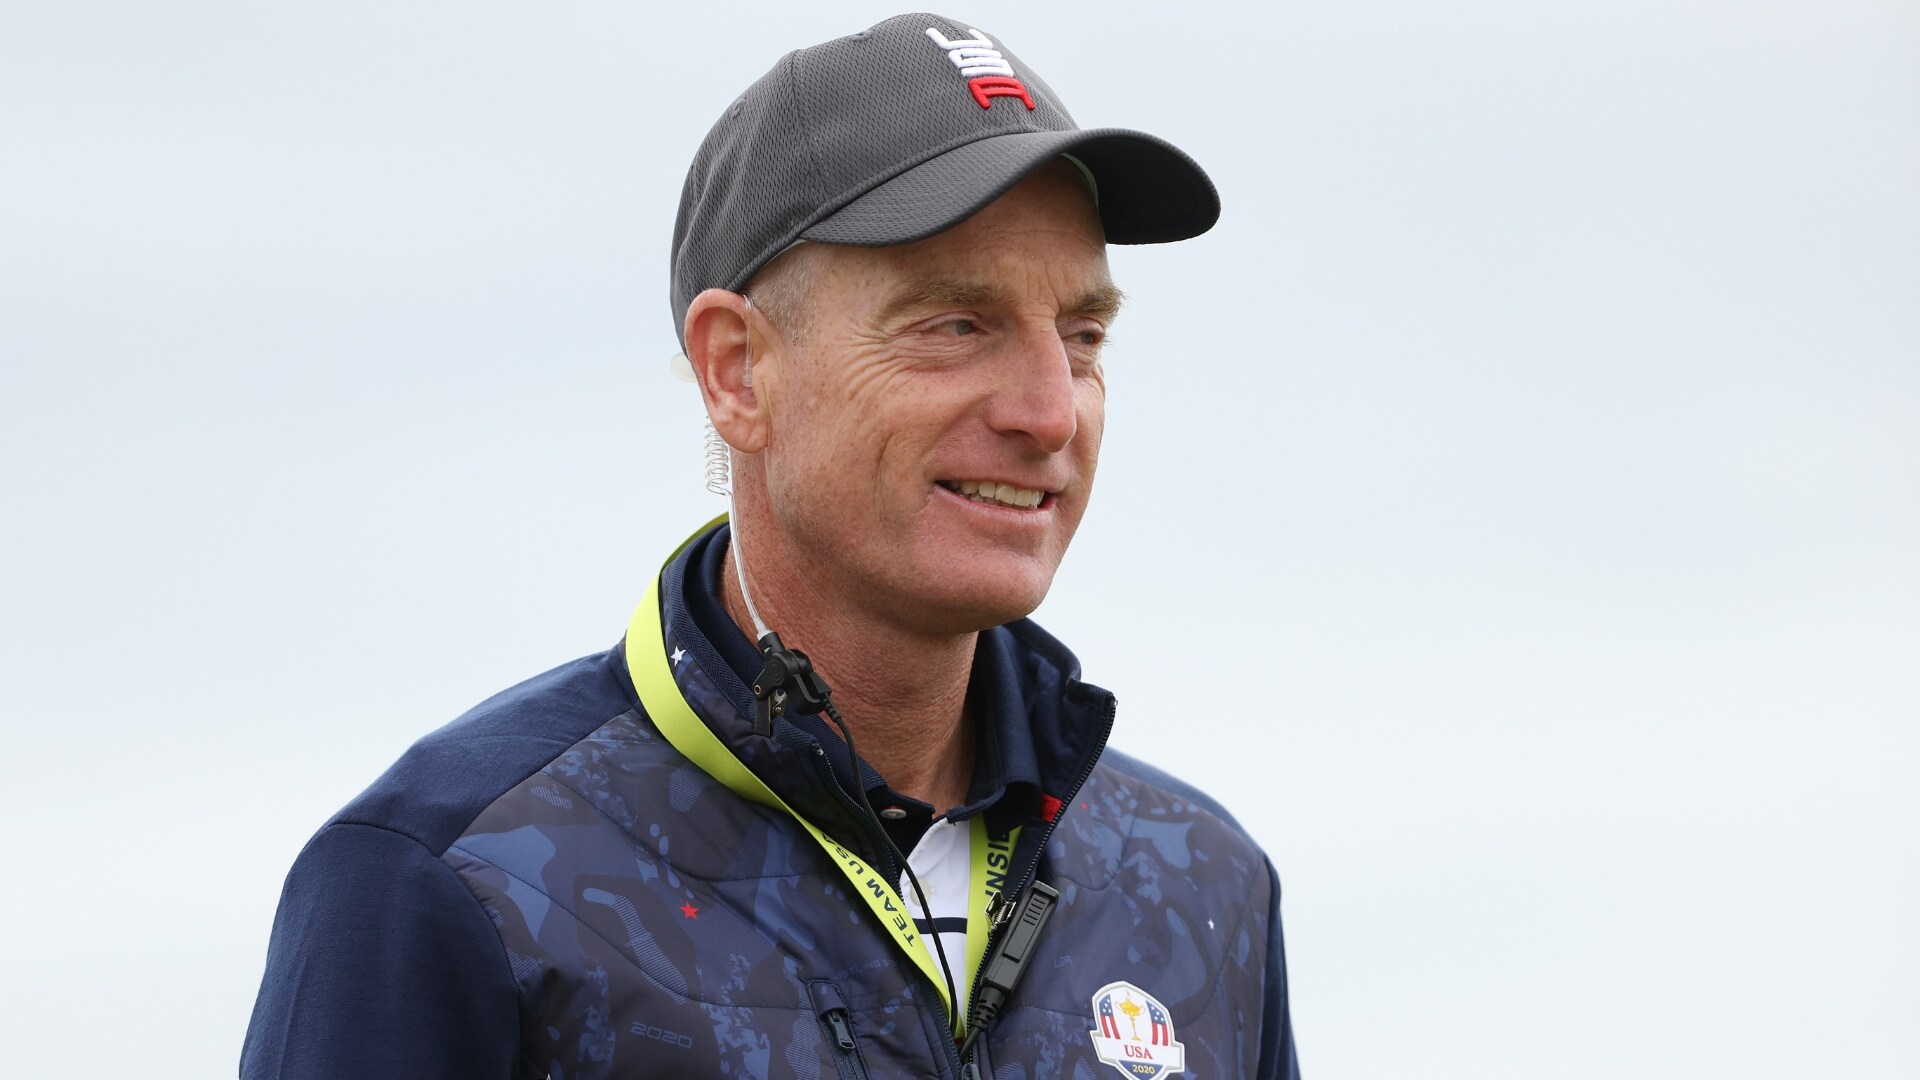 Jim Furyk to vice captain Team USA in 13th consecutive Ryder Cup appearance